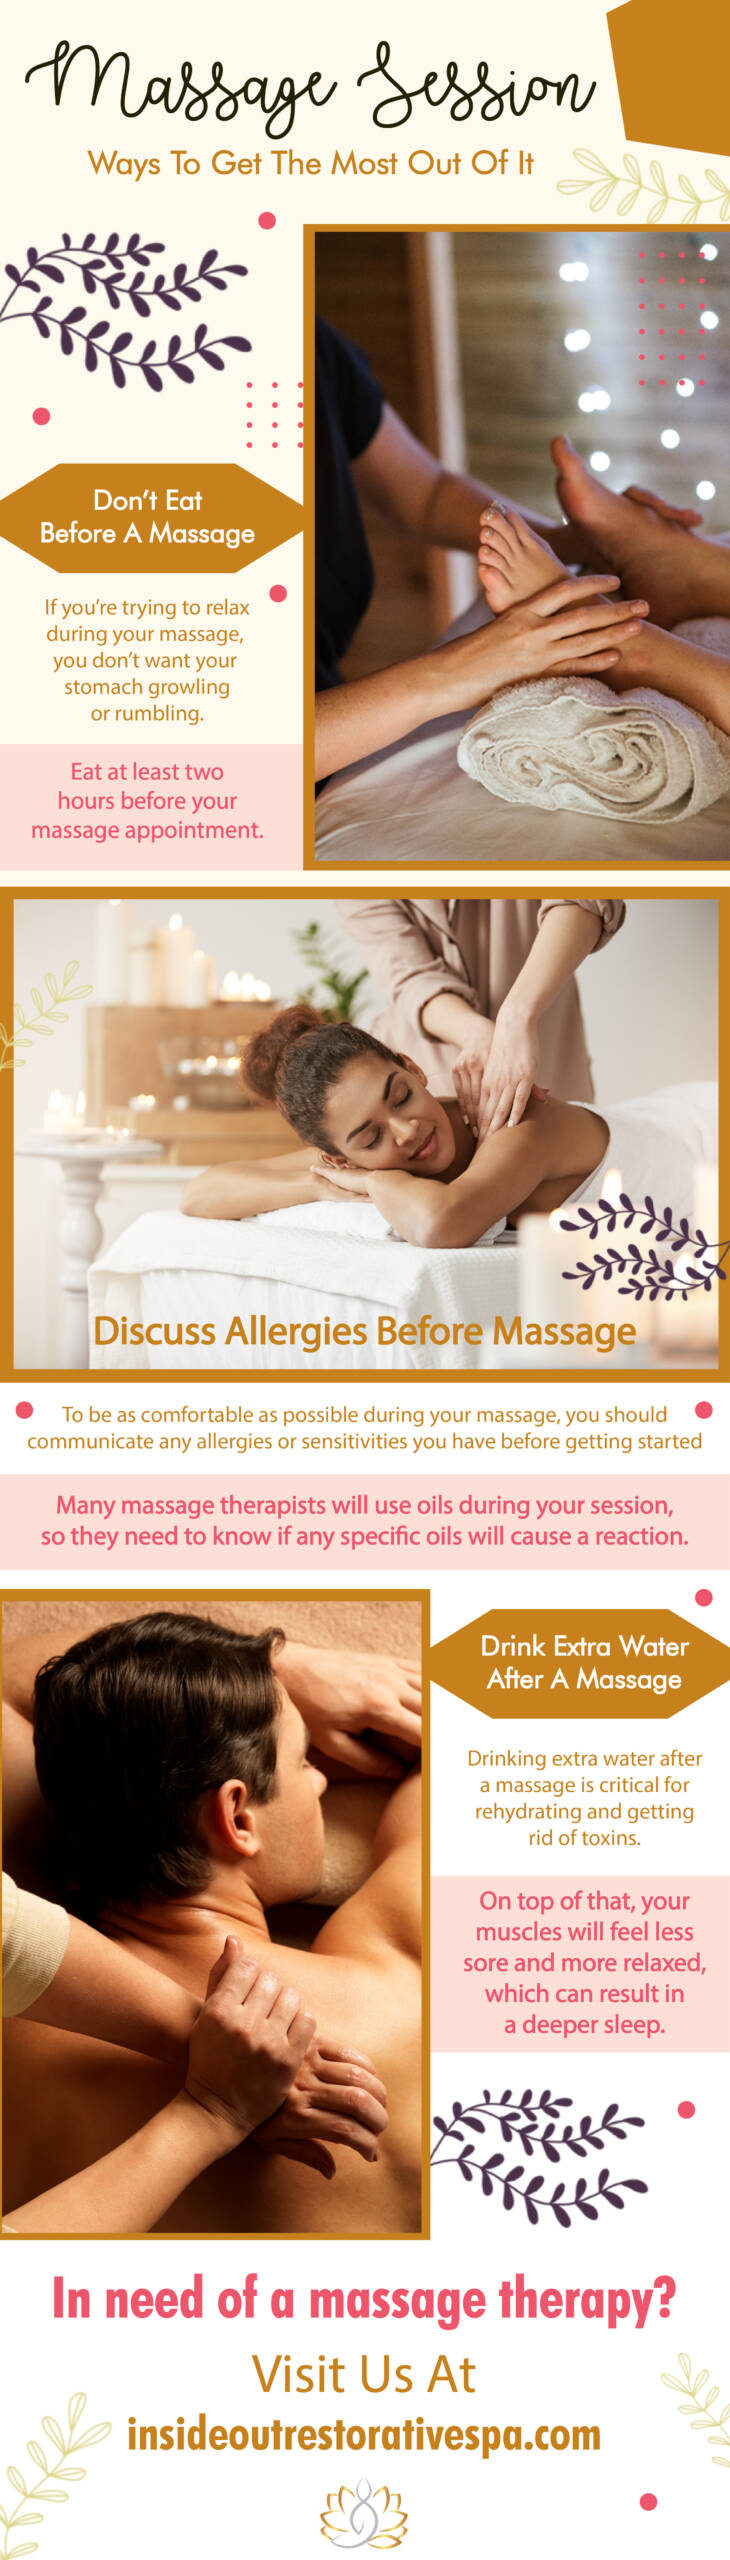 Massage Session - Ways to get the most of it (Infograph)